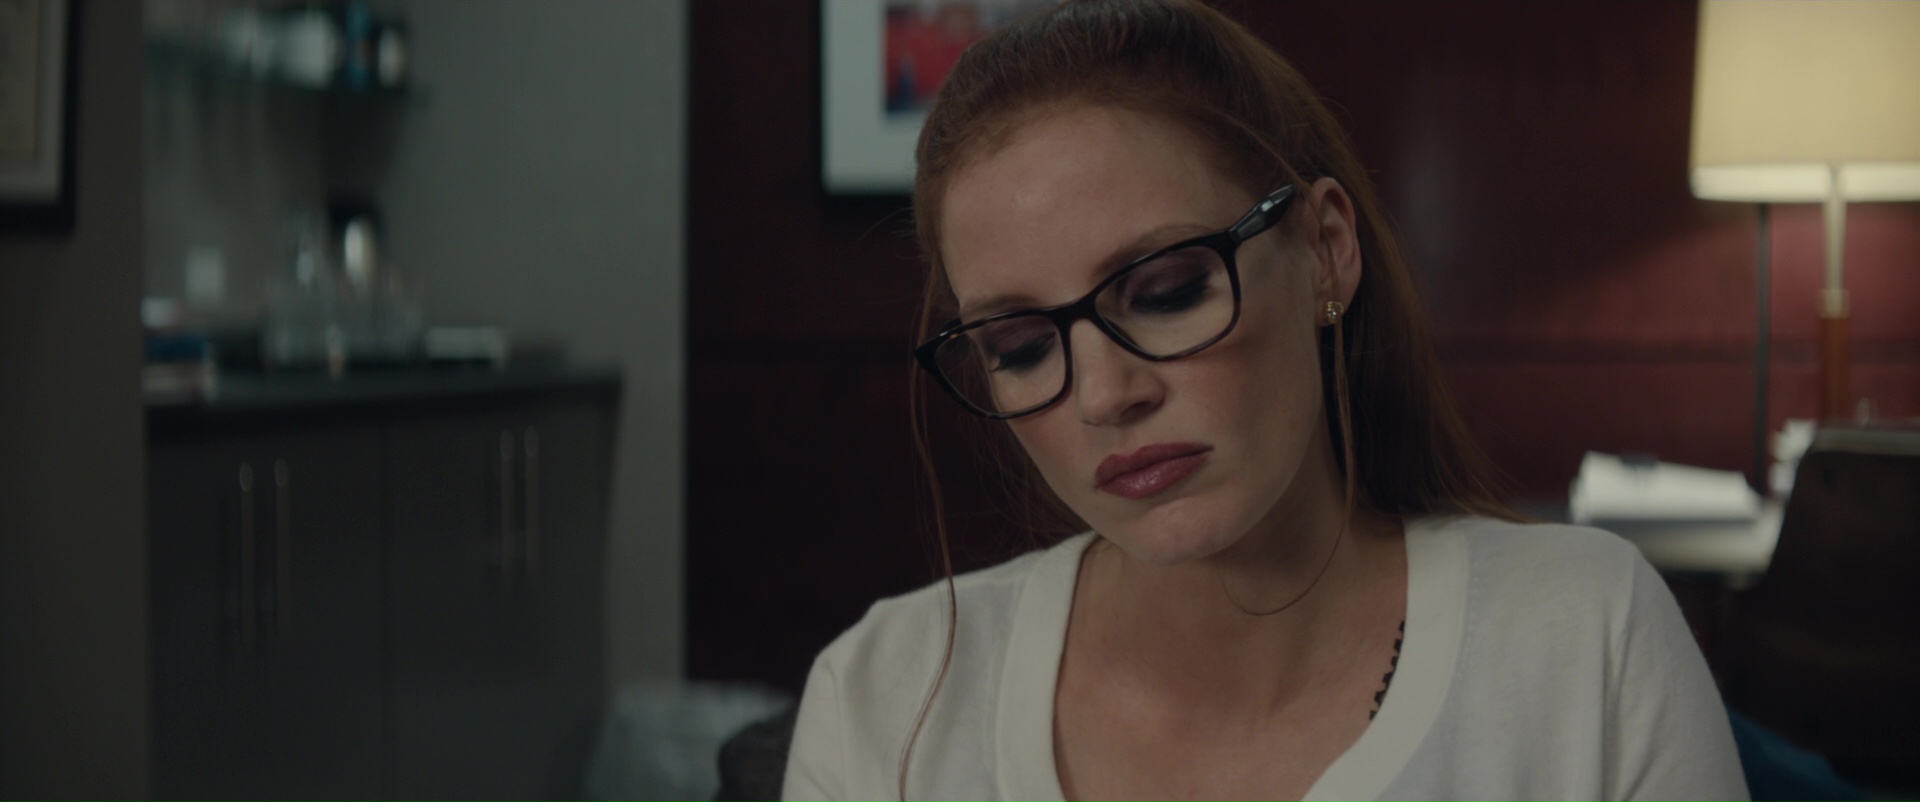 Prada Square Plastic Eyeglasses Worn by Jessica Chastain in Molly’s Game (2017) Movie1920 x 802